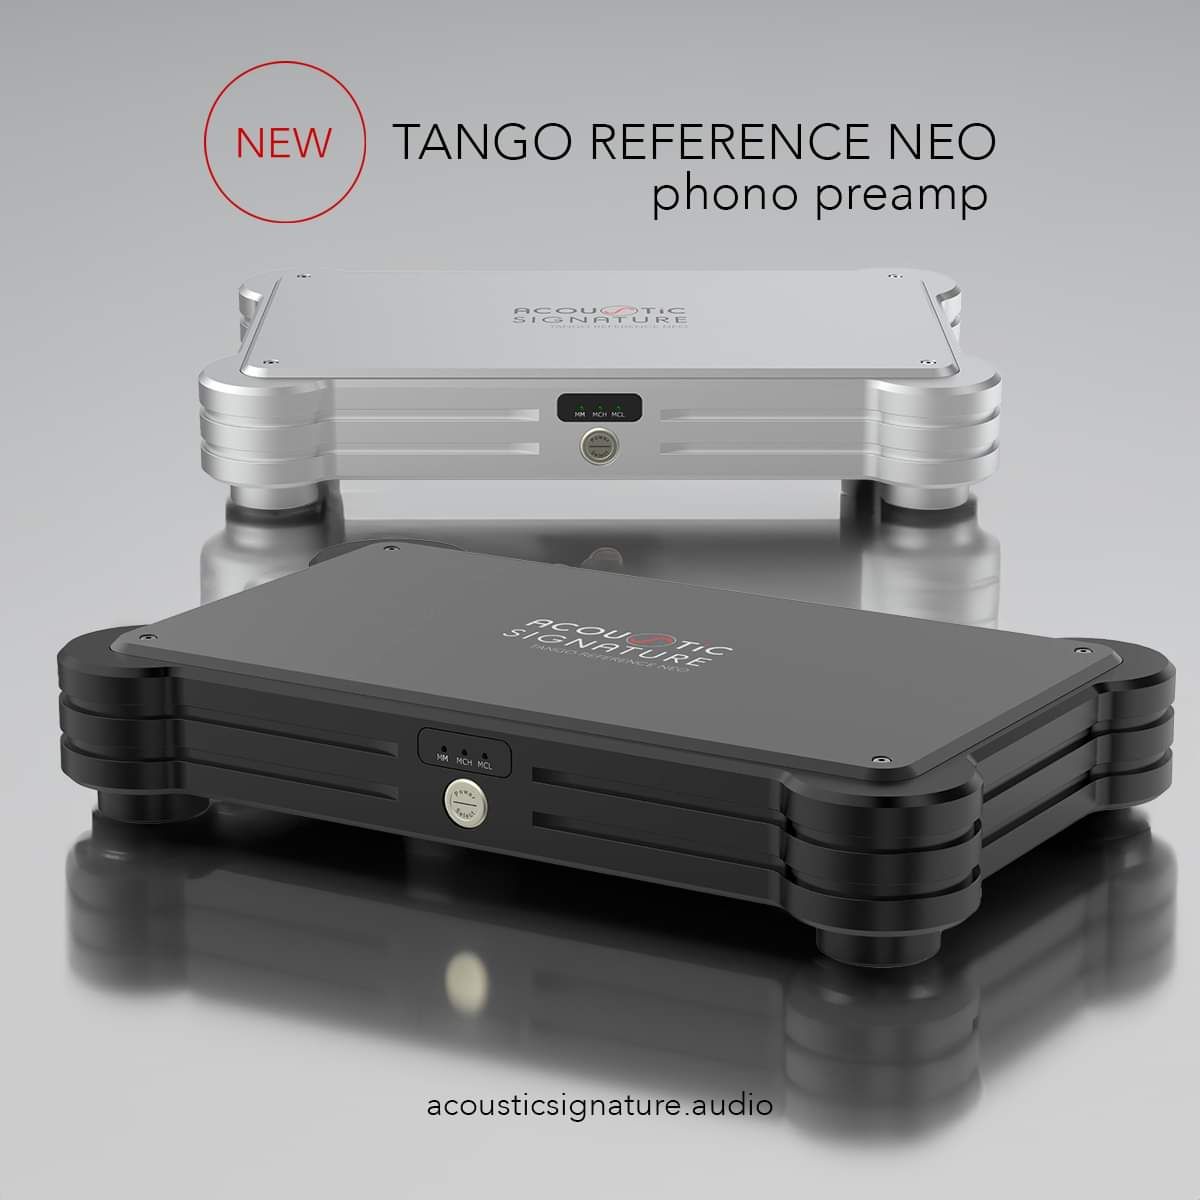 AcousticSignature TANGO REFERENCE NEO phono preamp

QUICK PROFILE

The Tango Reference NEO tackles ...

avcat.jp/next/avnews/20…